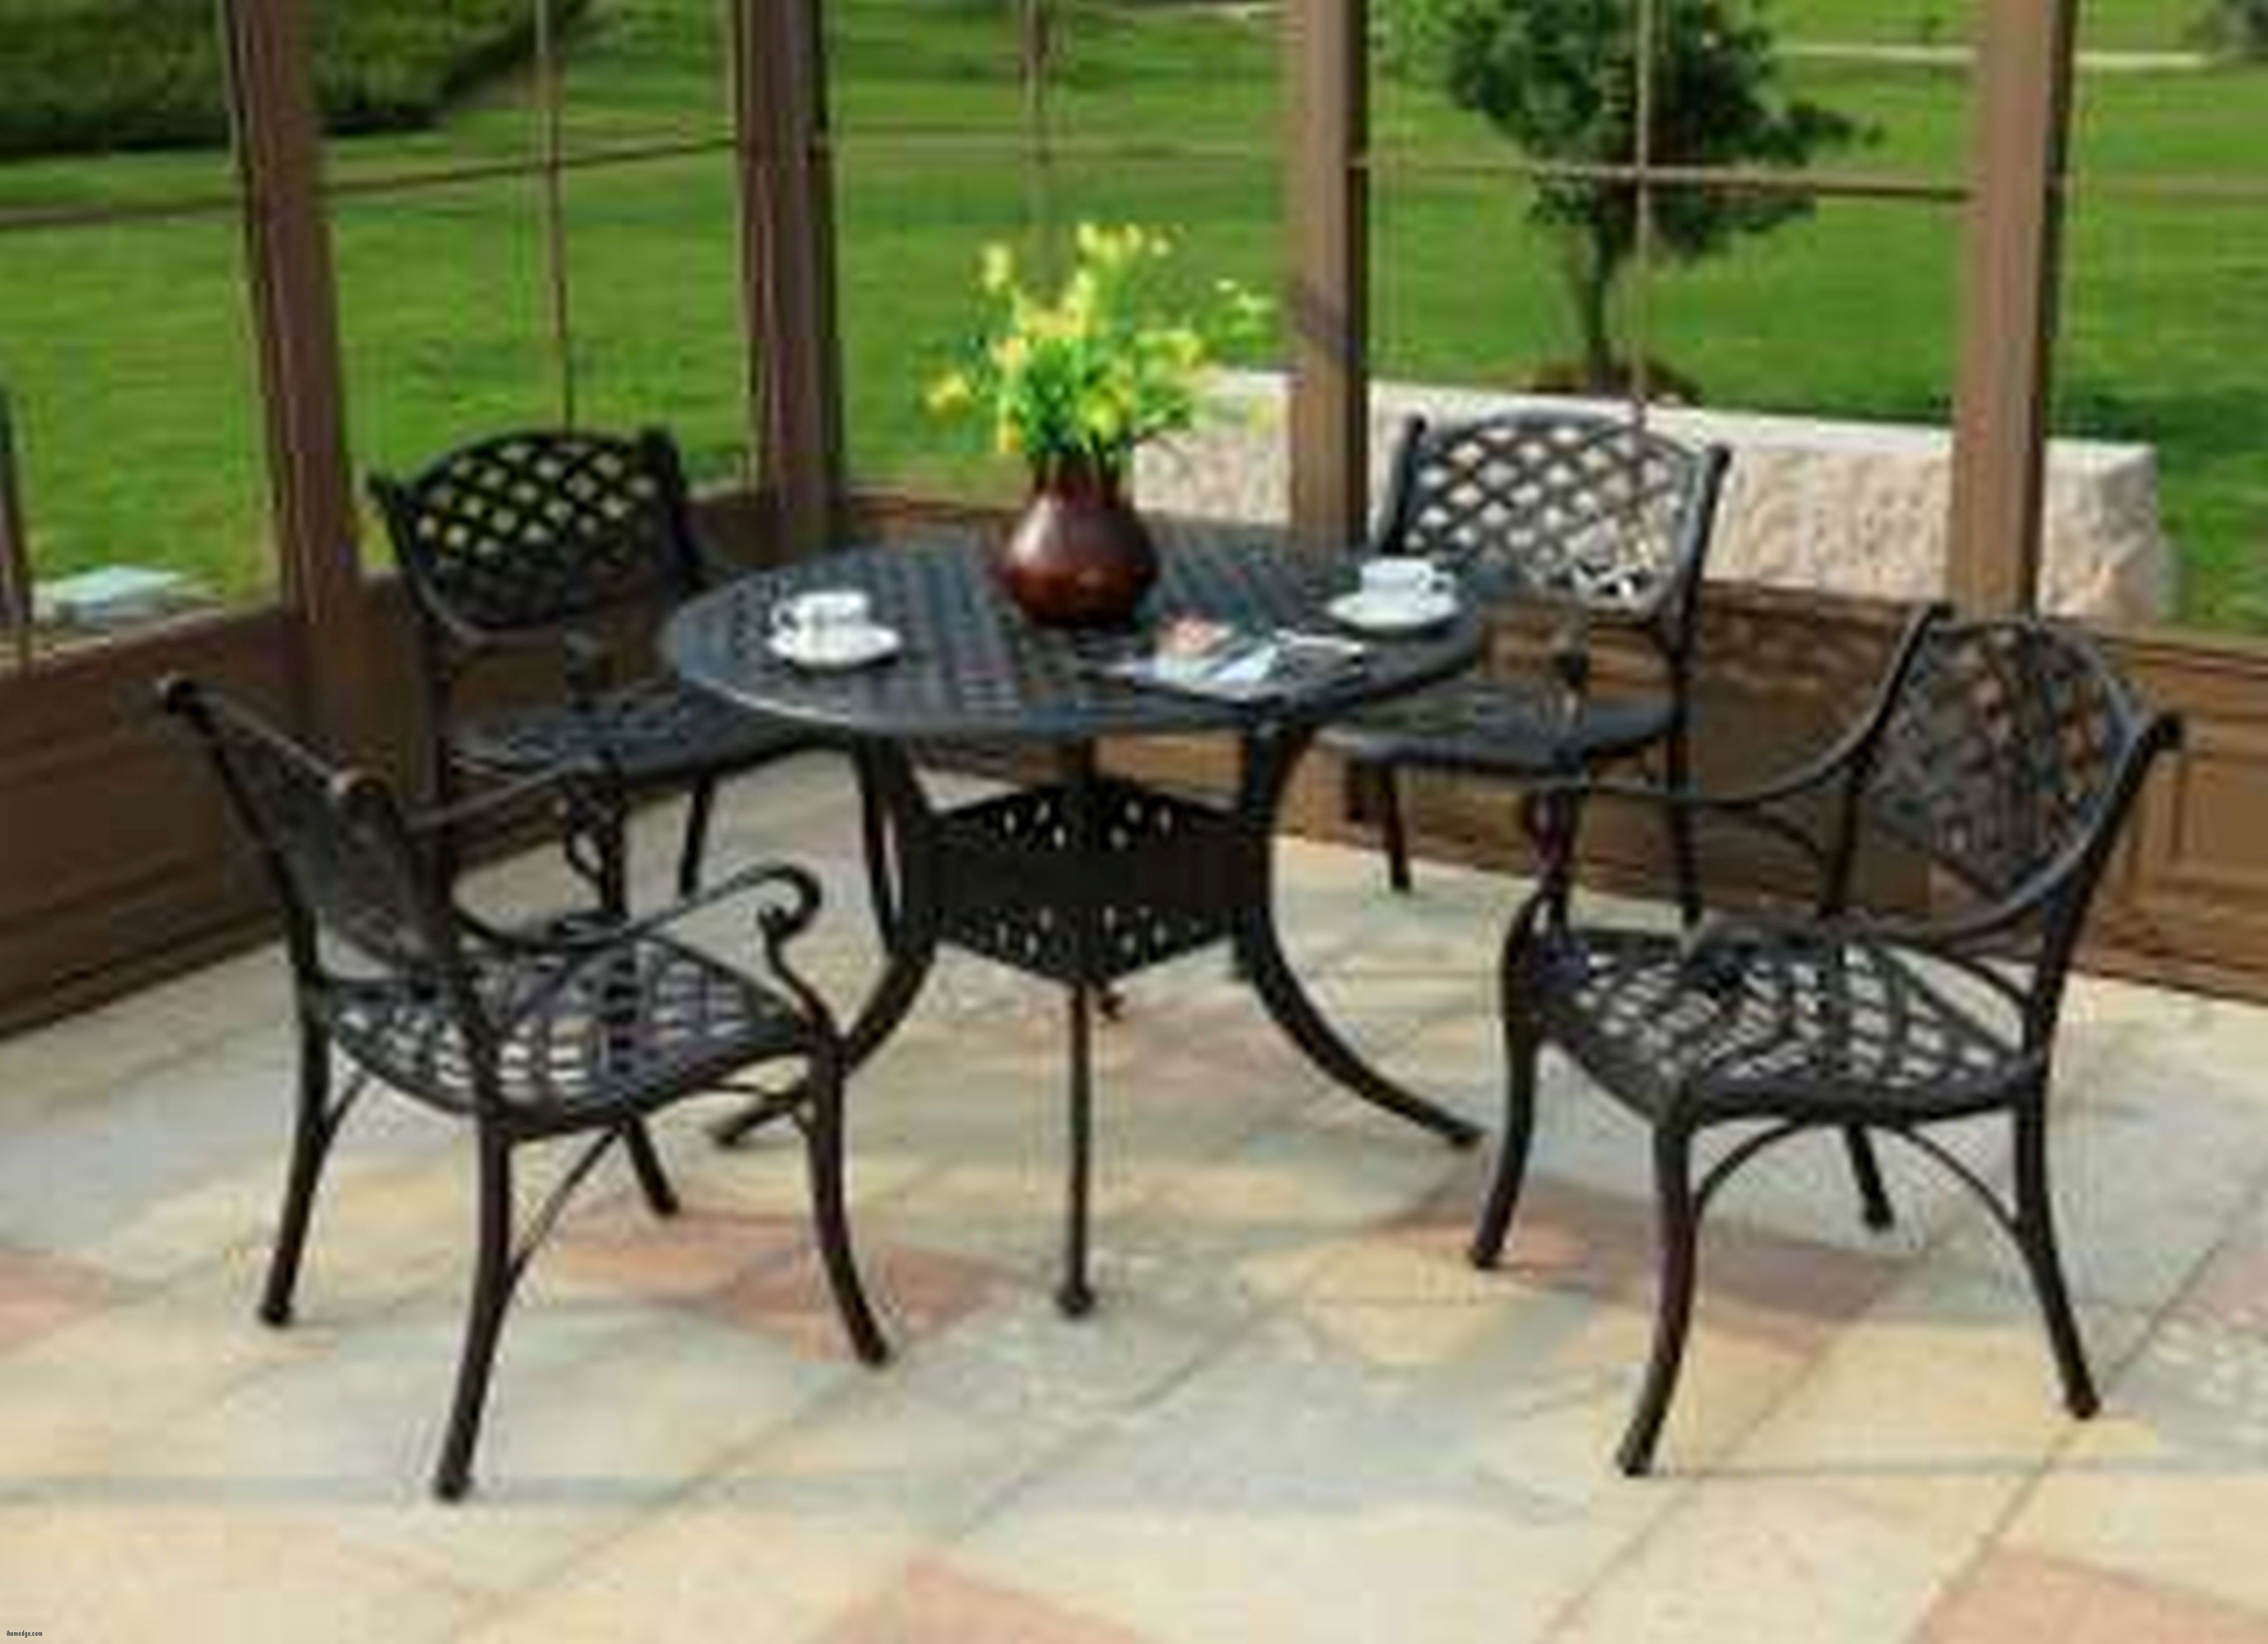 Reliable Metal Outdoor Furniture For Durability